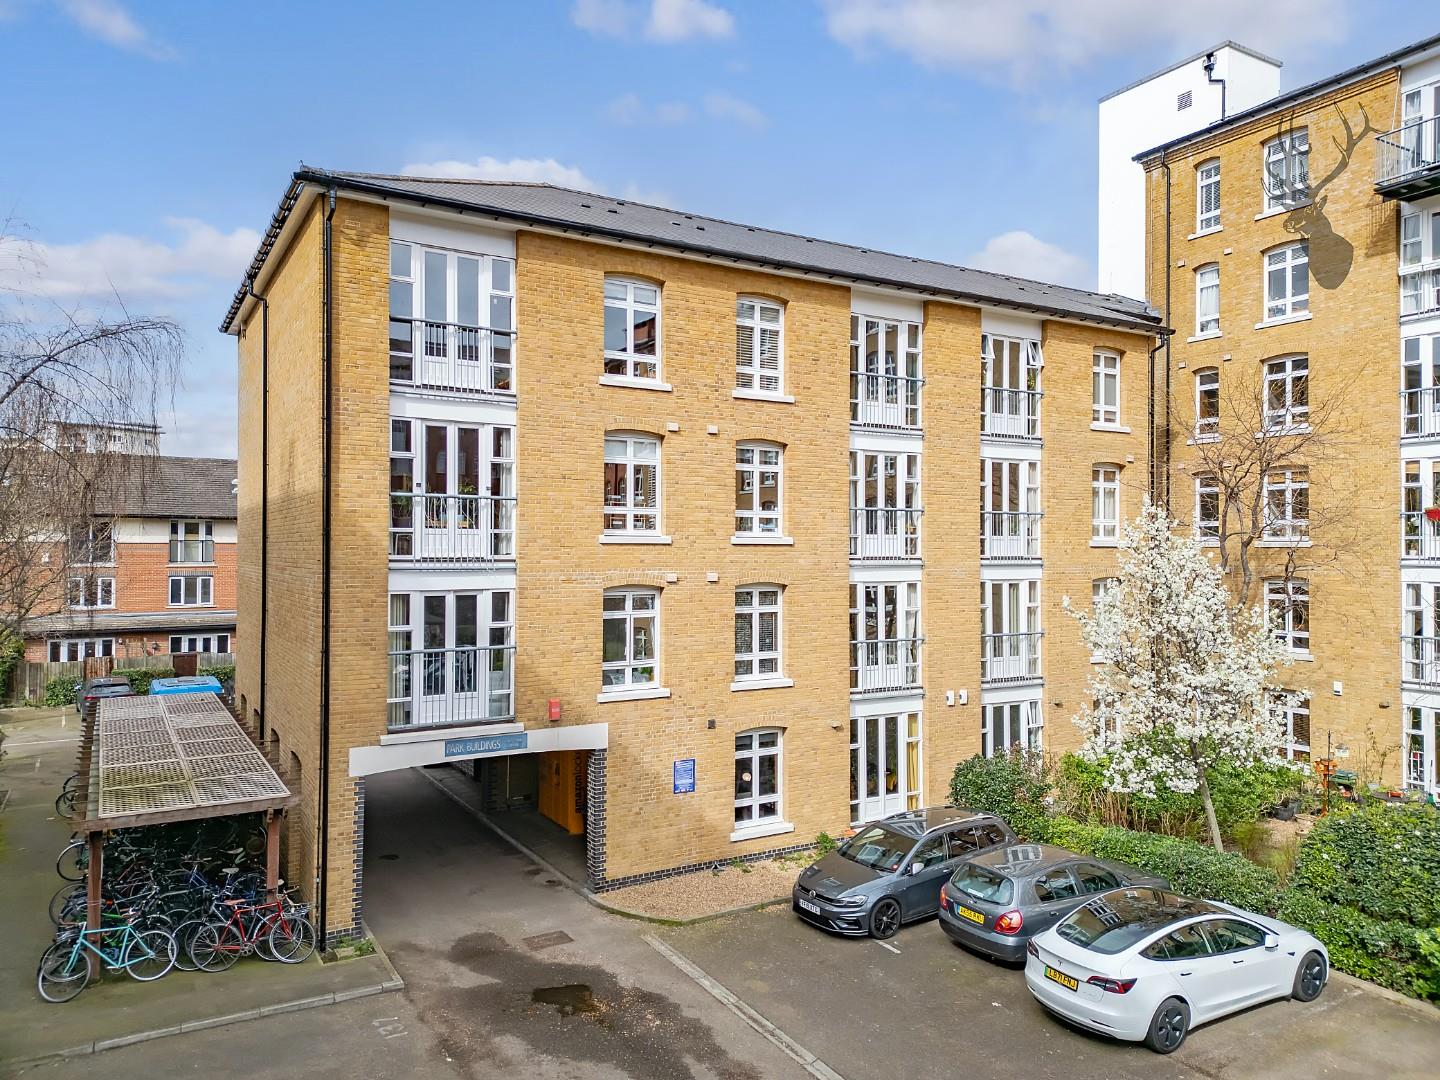 Similar Property: Flat - Ground Floor in Bow